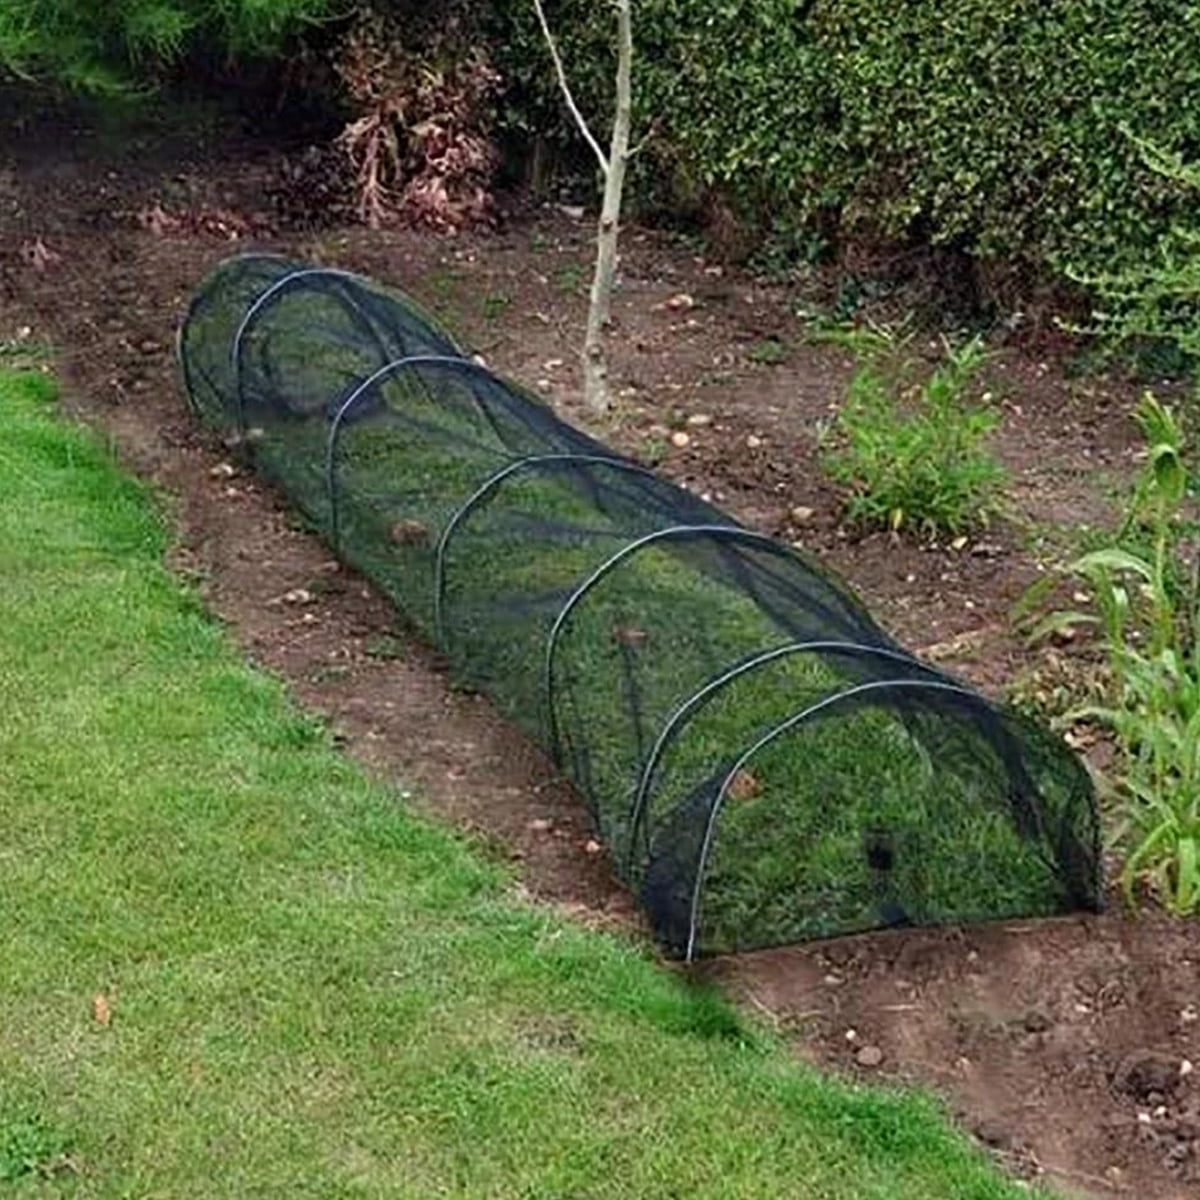 2 x NEW GARDEN NET GROW TUNNEL PROTECT PLANTS VEGETABLES INSECTS BIRDS PESTS 